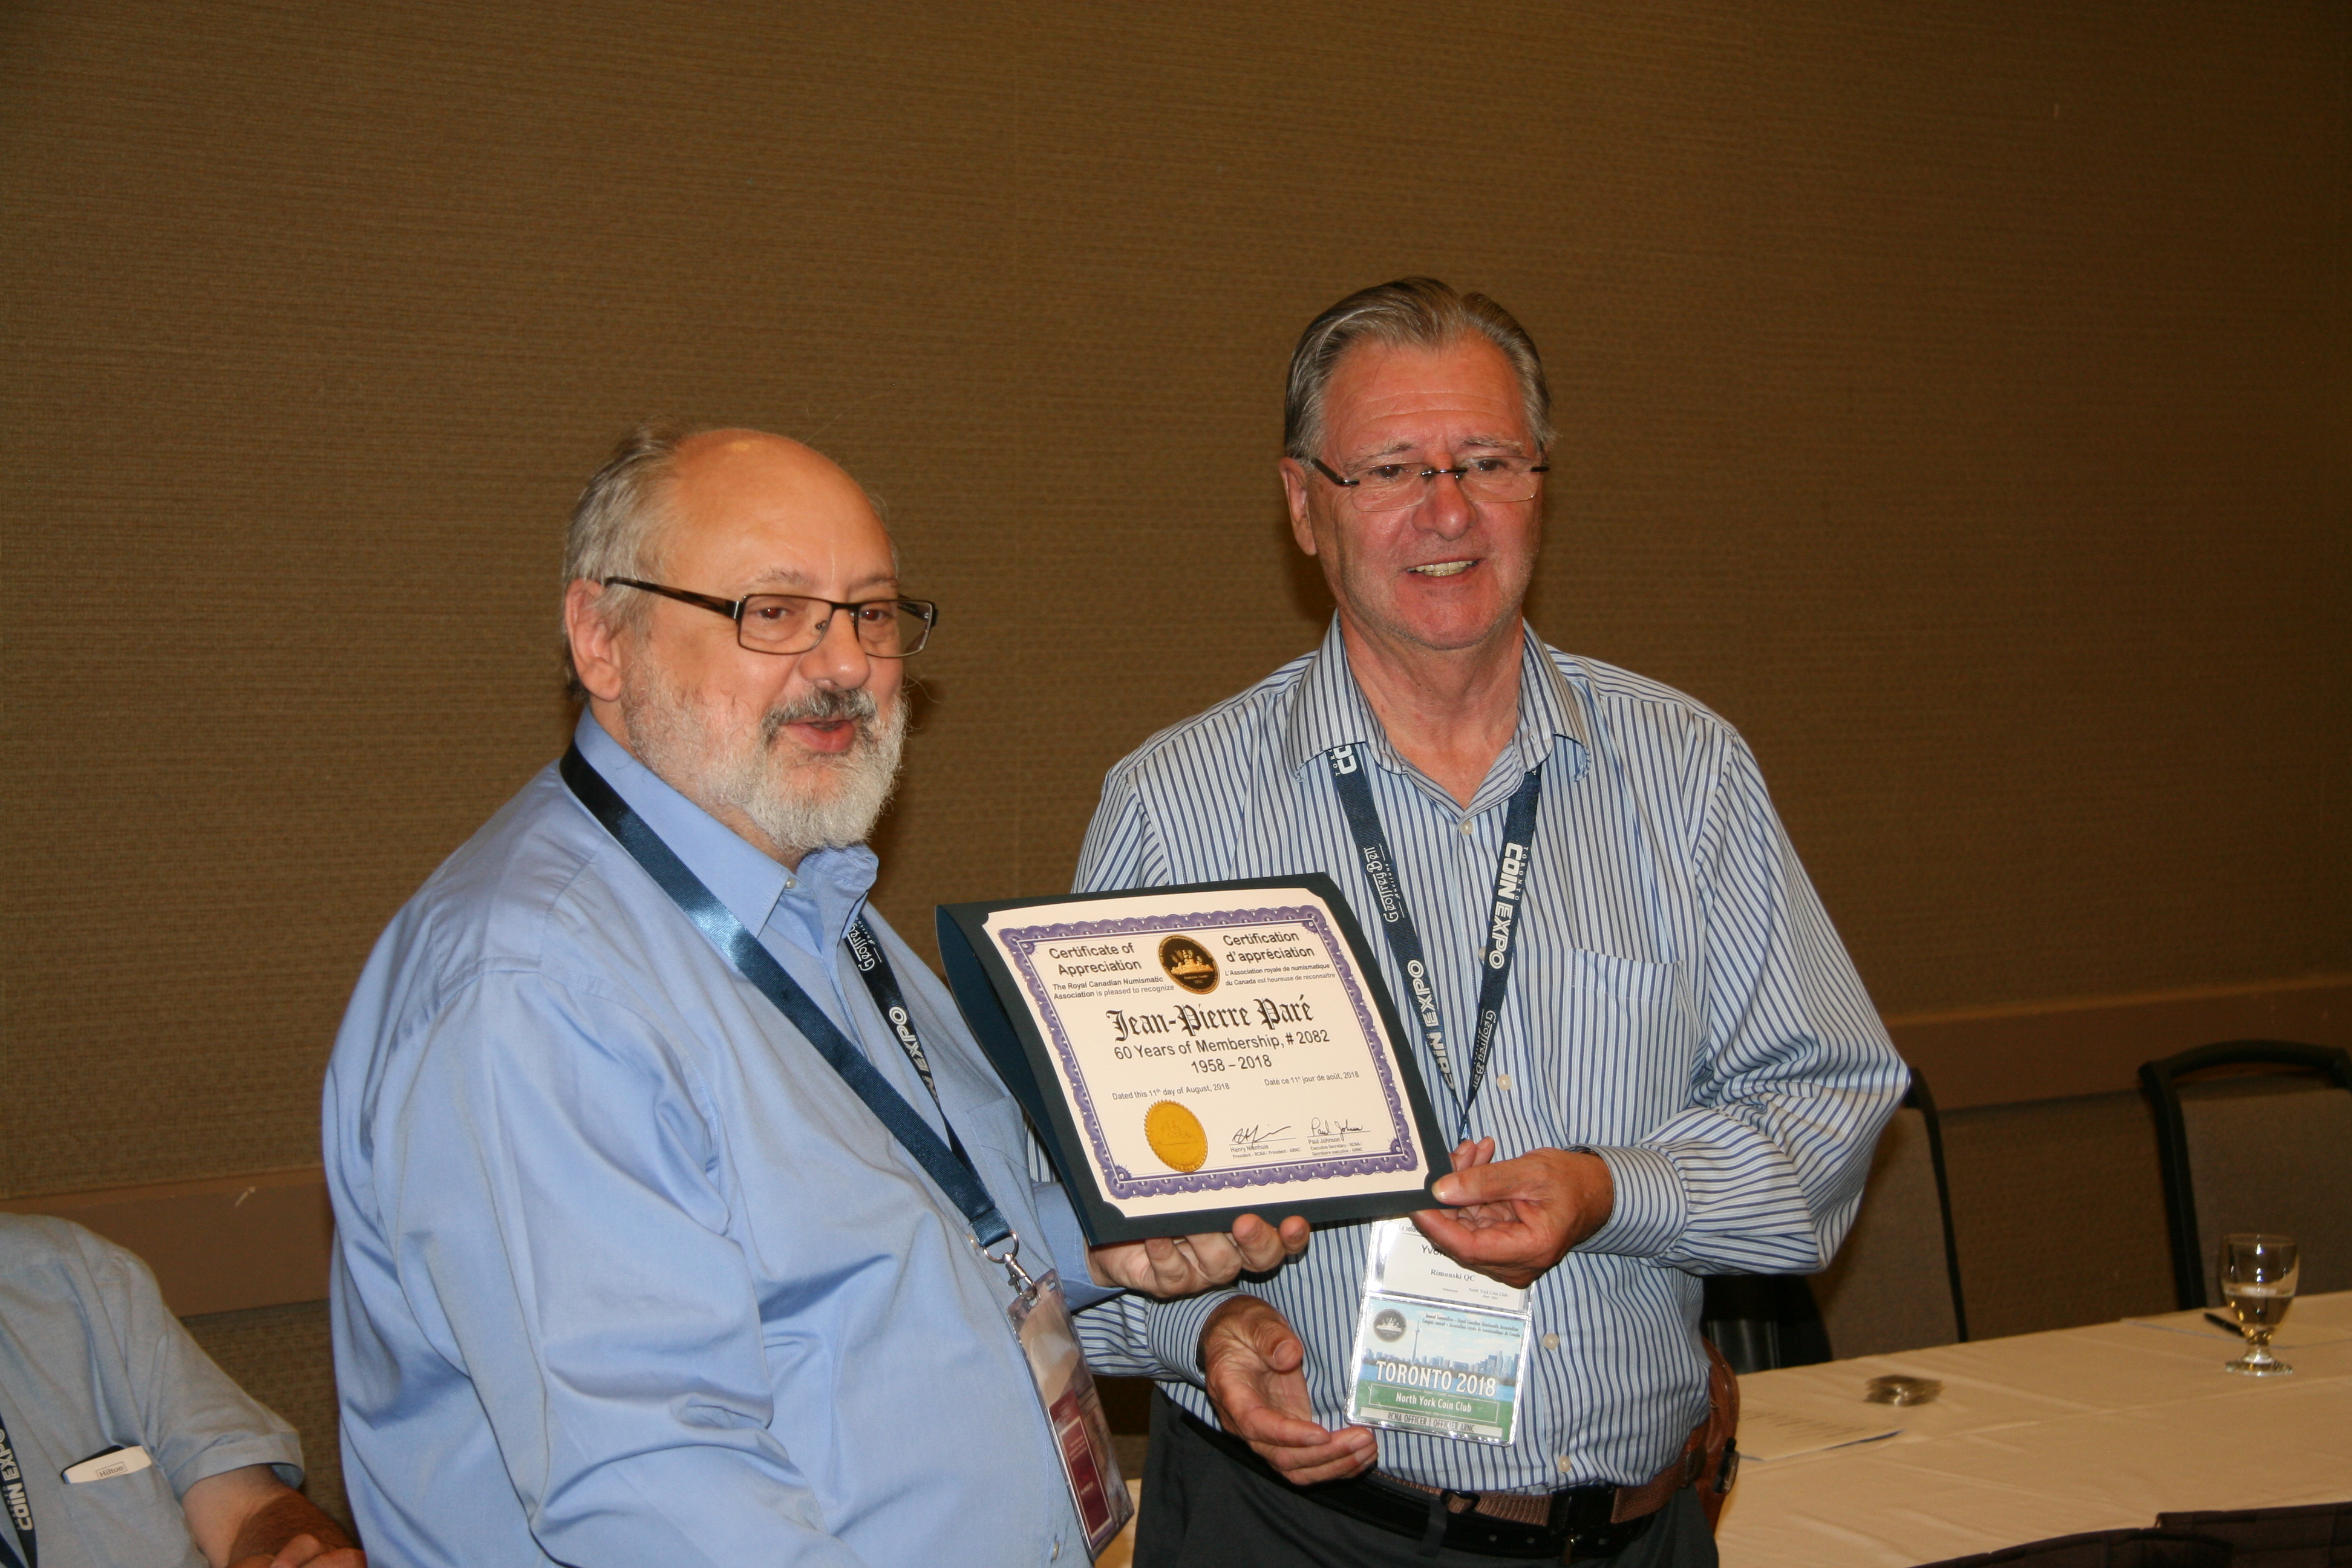 <p><strong>Yvon Marquis</strong> (right) receiving his 40 years of membership recognition award from <strong>Henry Nienhuis</strong> (left).<br> <small>Dan Gosling photo</small></p>